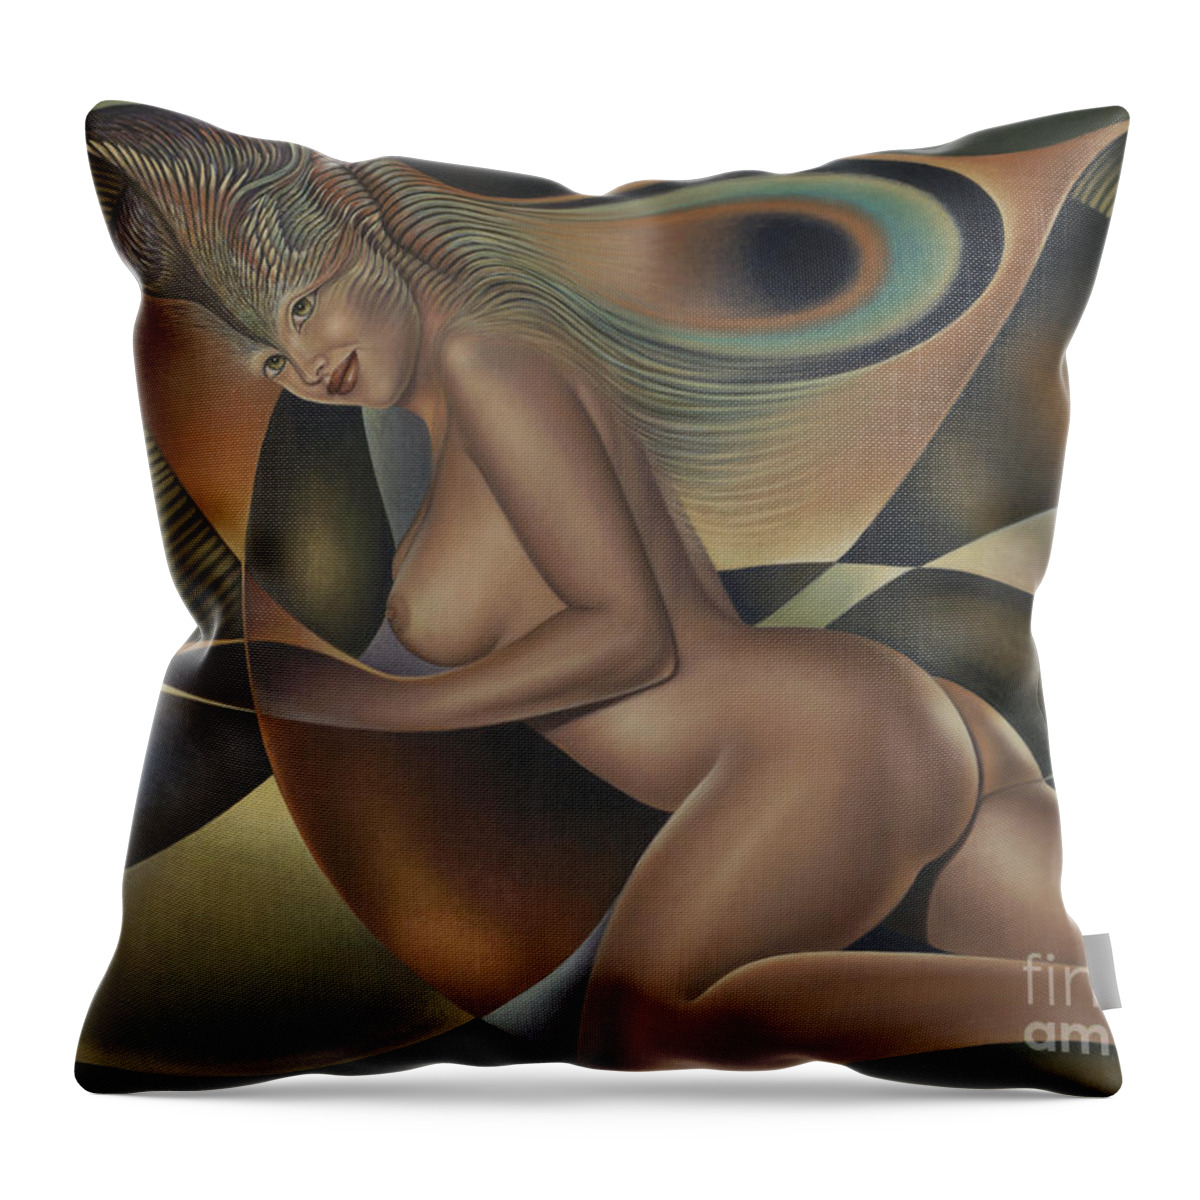 Nude-art Throw Pillow featuring the painting Dynamic Queen 4 by Ricardo Chavez-Mendez